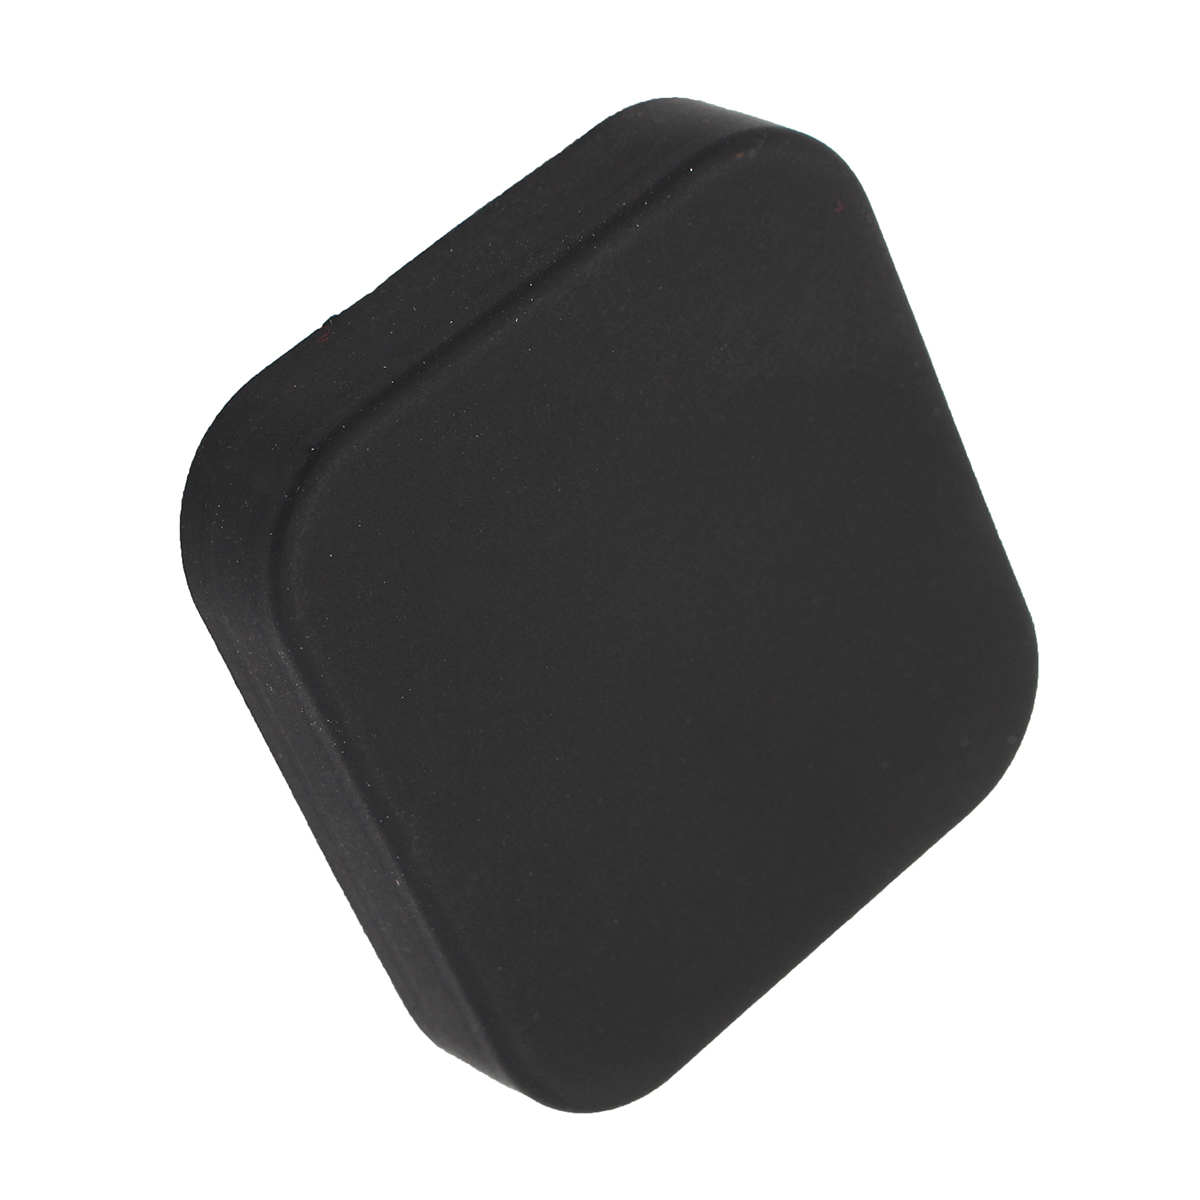 Black-Silicone-Protective-Lens-Cap-Case-Cover-Protector-For-Gopro-Hero-5-Camera-1112880